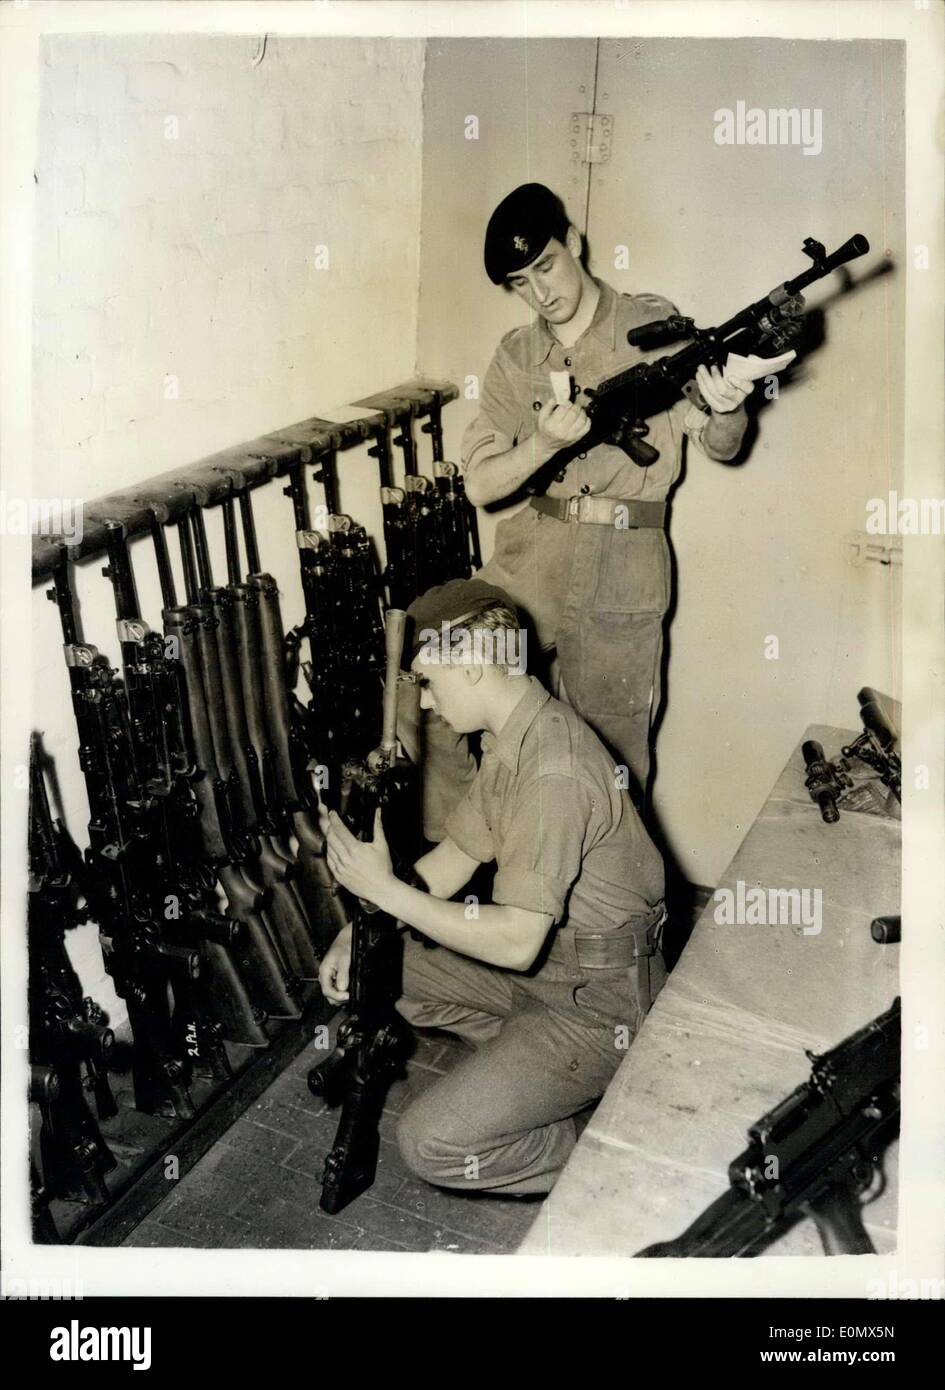 Aug. 03, 1956 - Operation Suez commence's checking arms - at Warley Barracks.: Men of the Oxford and Bucks Light Infantry were to be seen preparing for duty at the Warley Barracks, Essez - today - owing to the Suez Canal Emergency. Some have been recalled from leave. Photo shows checking arms in the armoury - at the Barracks today. PTE. John Bailey (19) from Wellington Shrepshire (nearest camera) and L/CPL.John Graham of R.E.M.E. from Liverpool. He is 19. Stock Photo